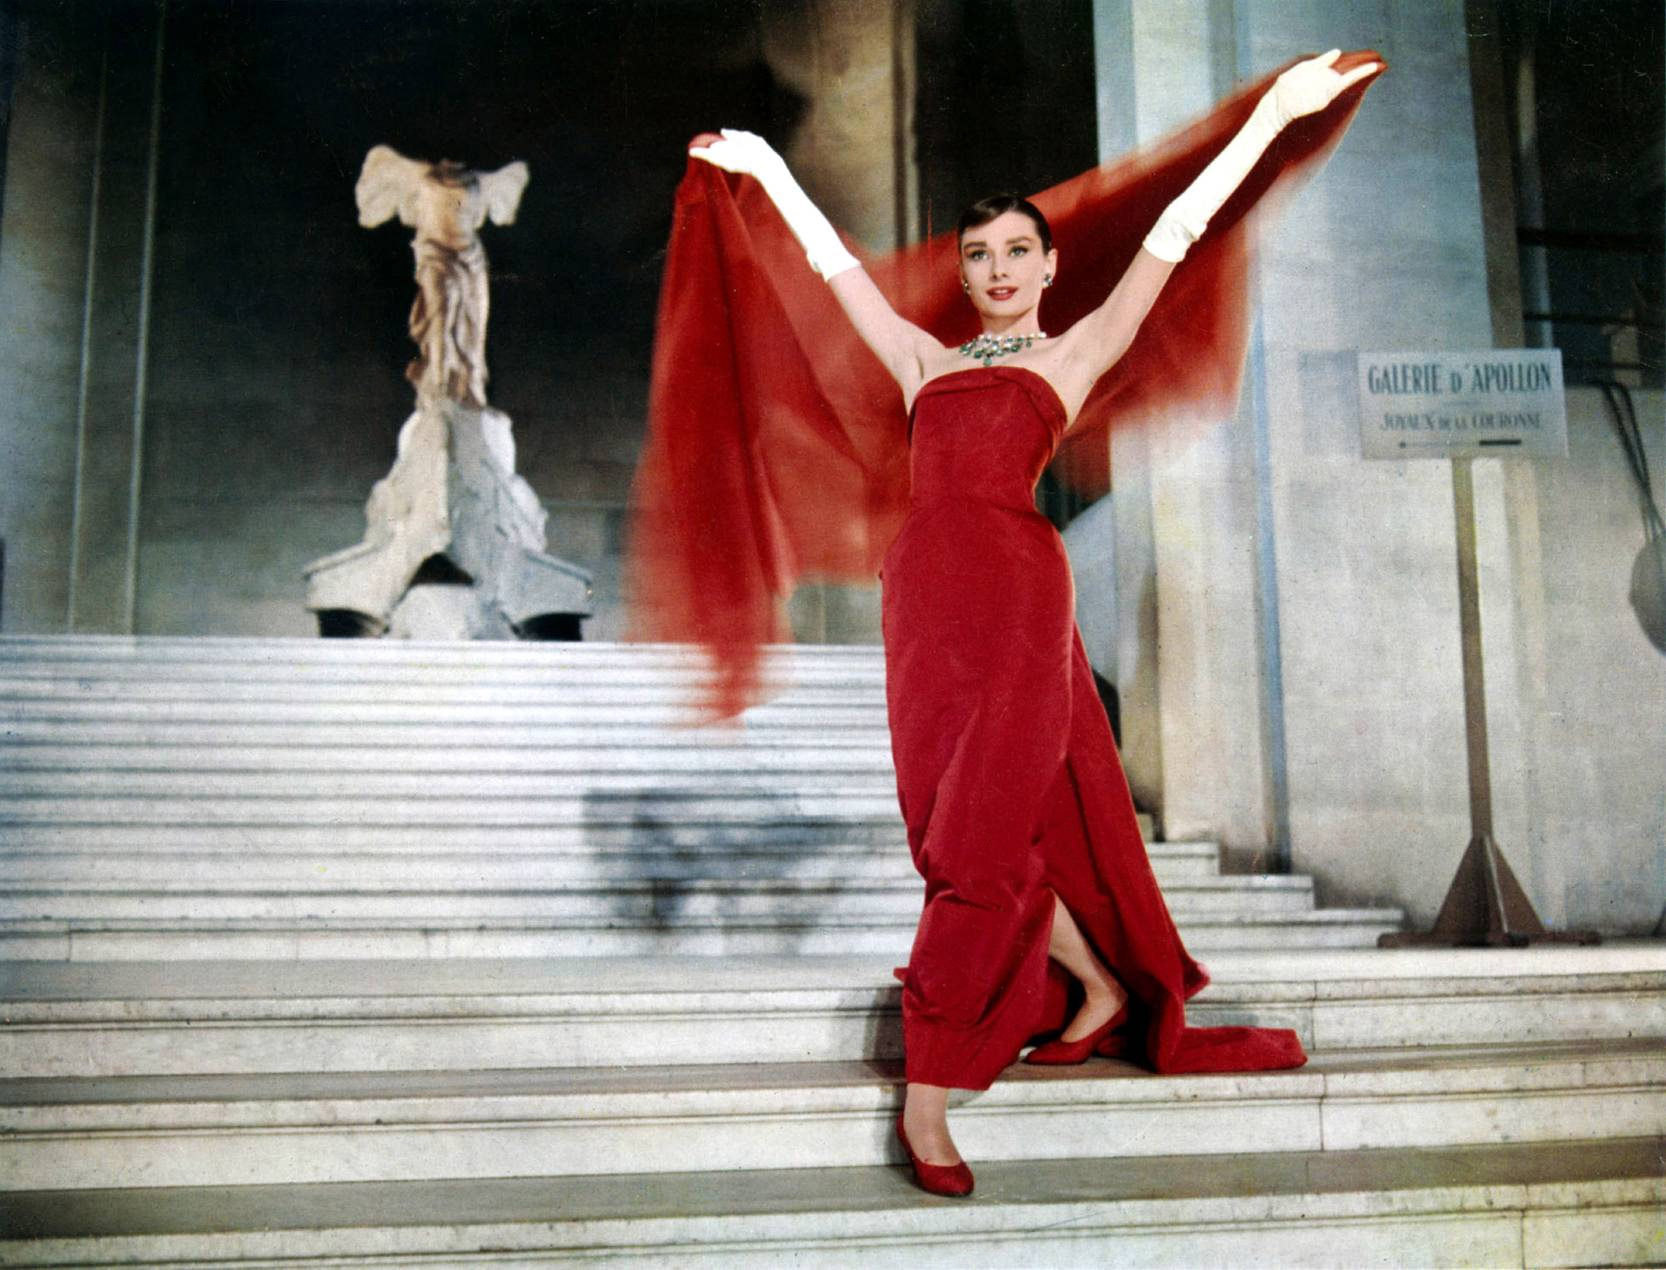 Funny Face (1957) - Hepburn in Givenchy's design